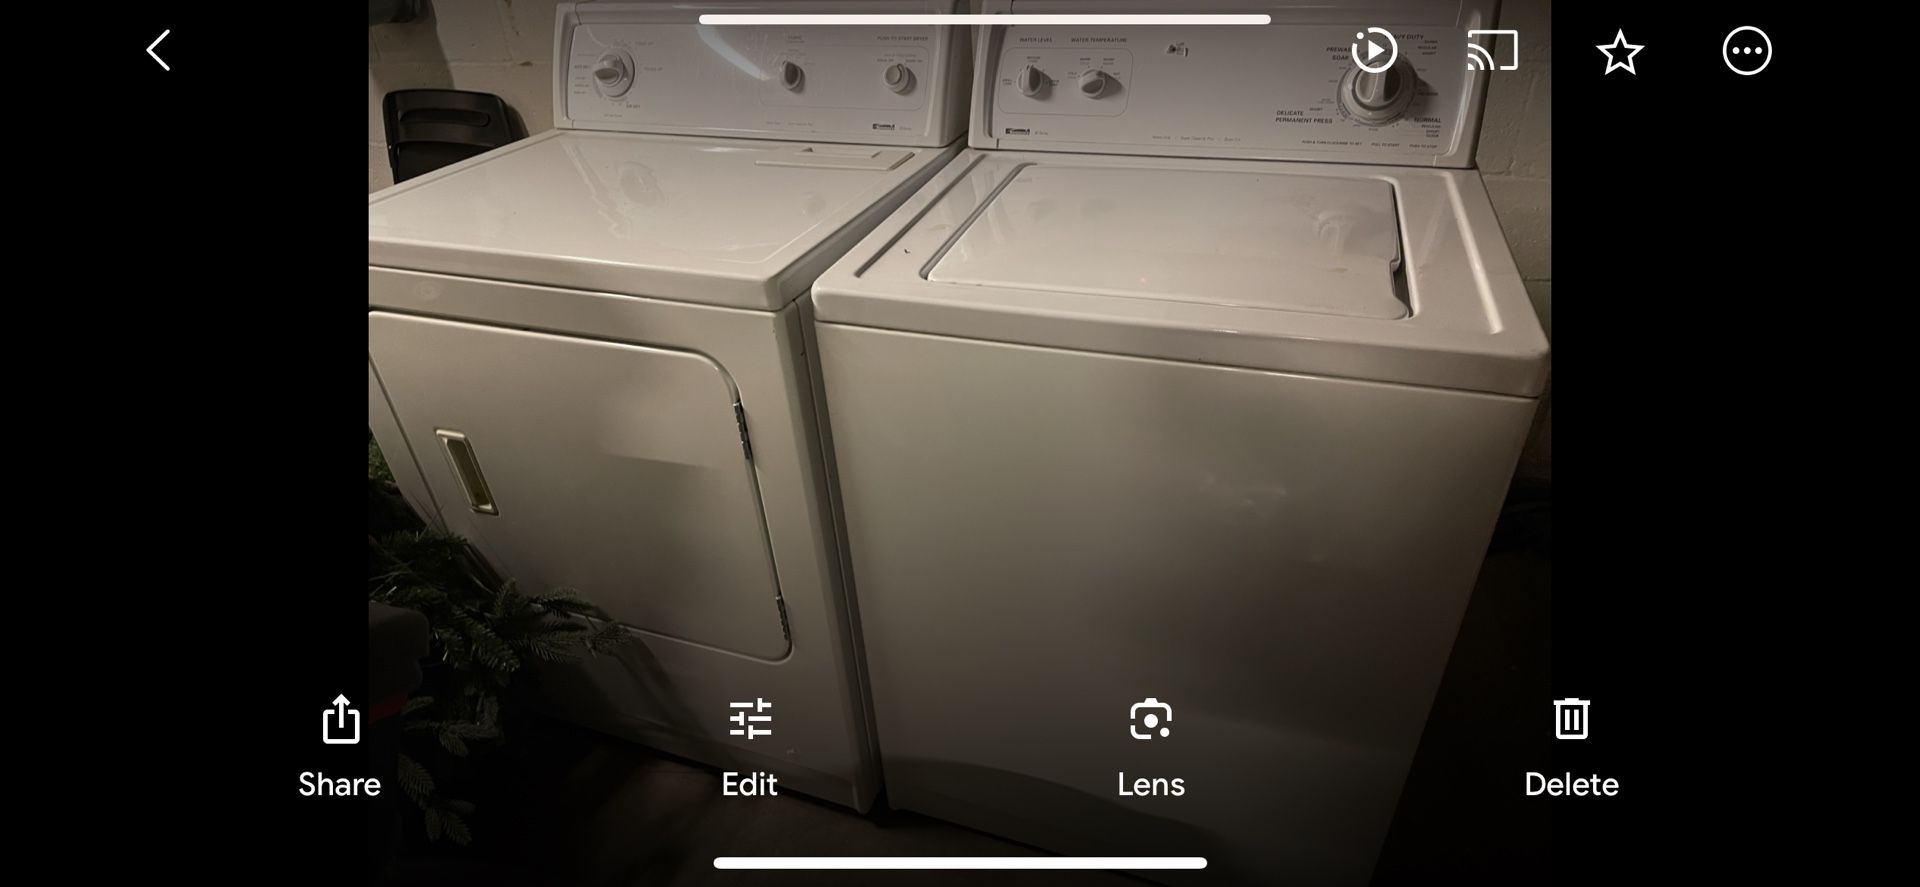 Laundry Machine and Drier